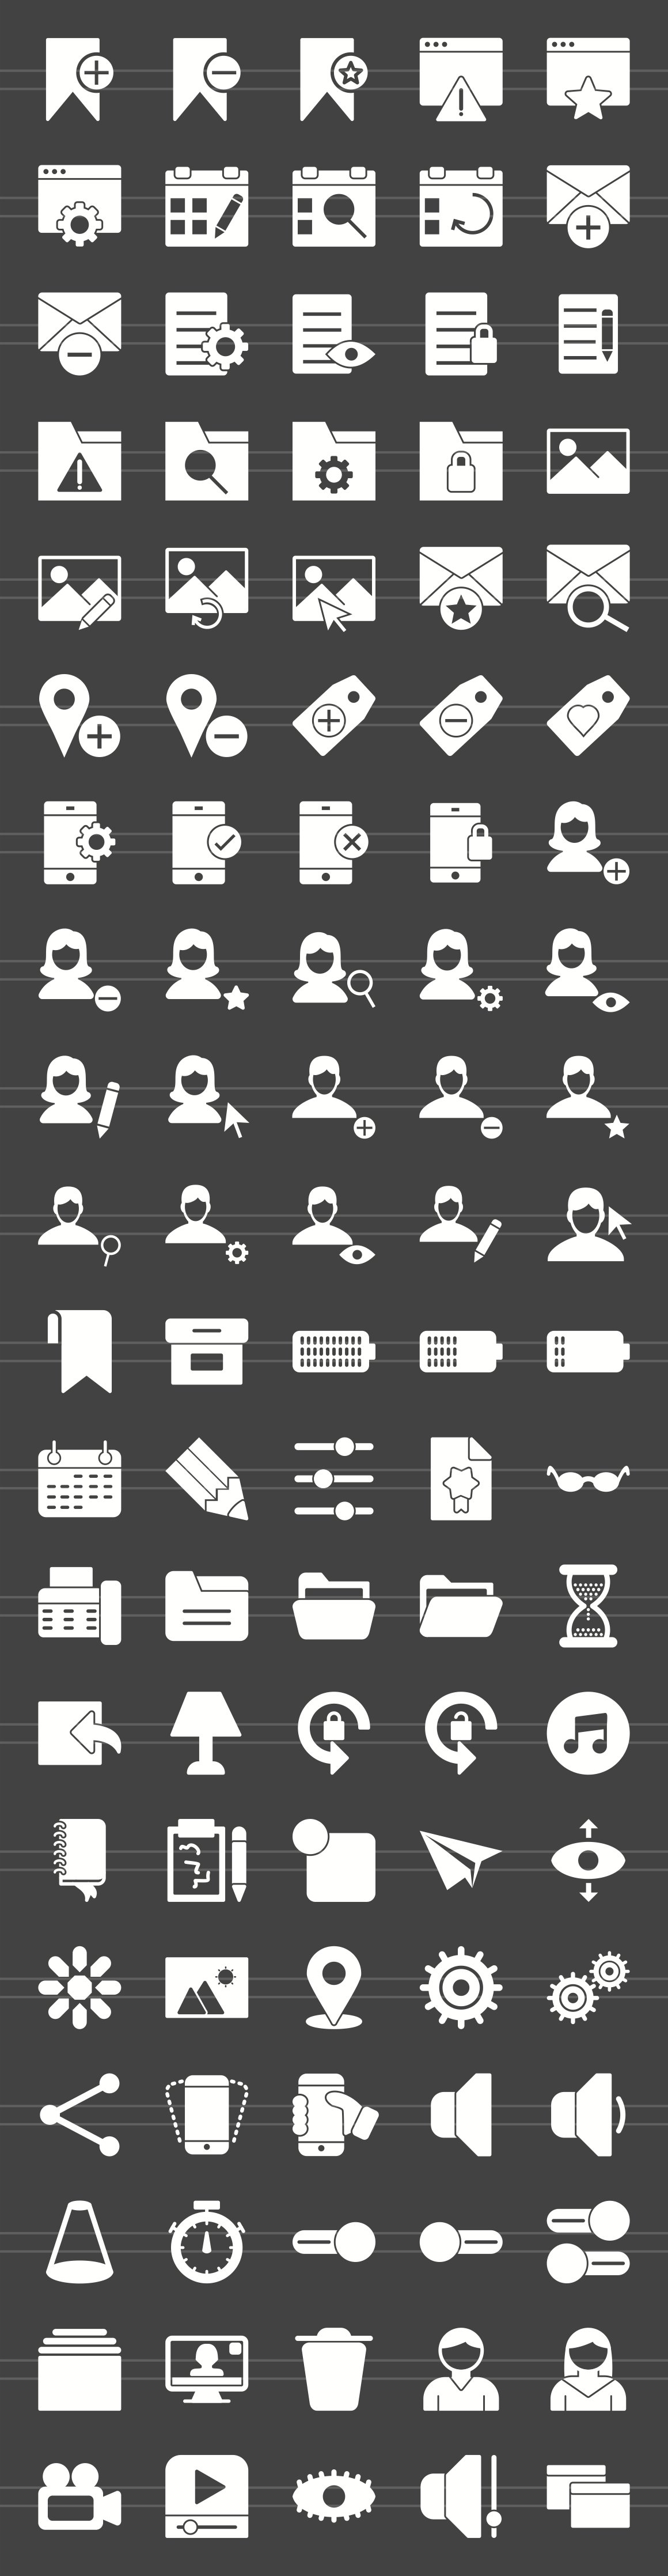 100 App & Web Interface Glyph Icons preview image.